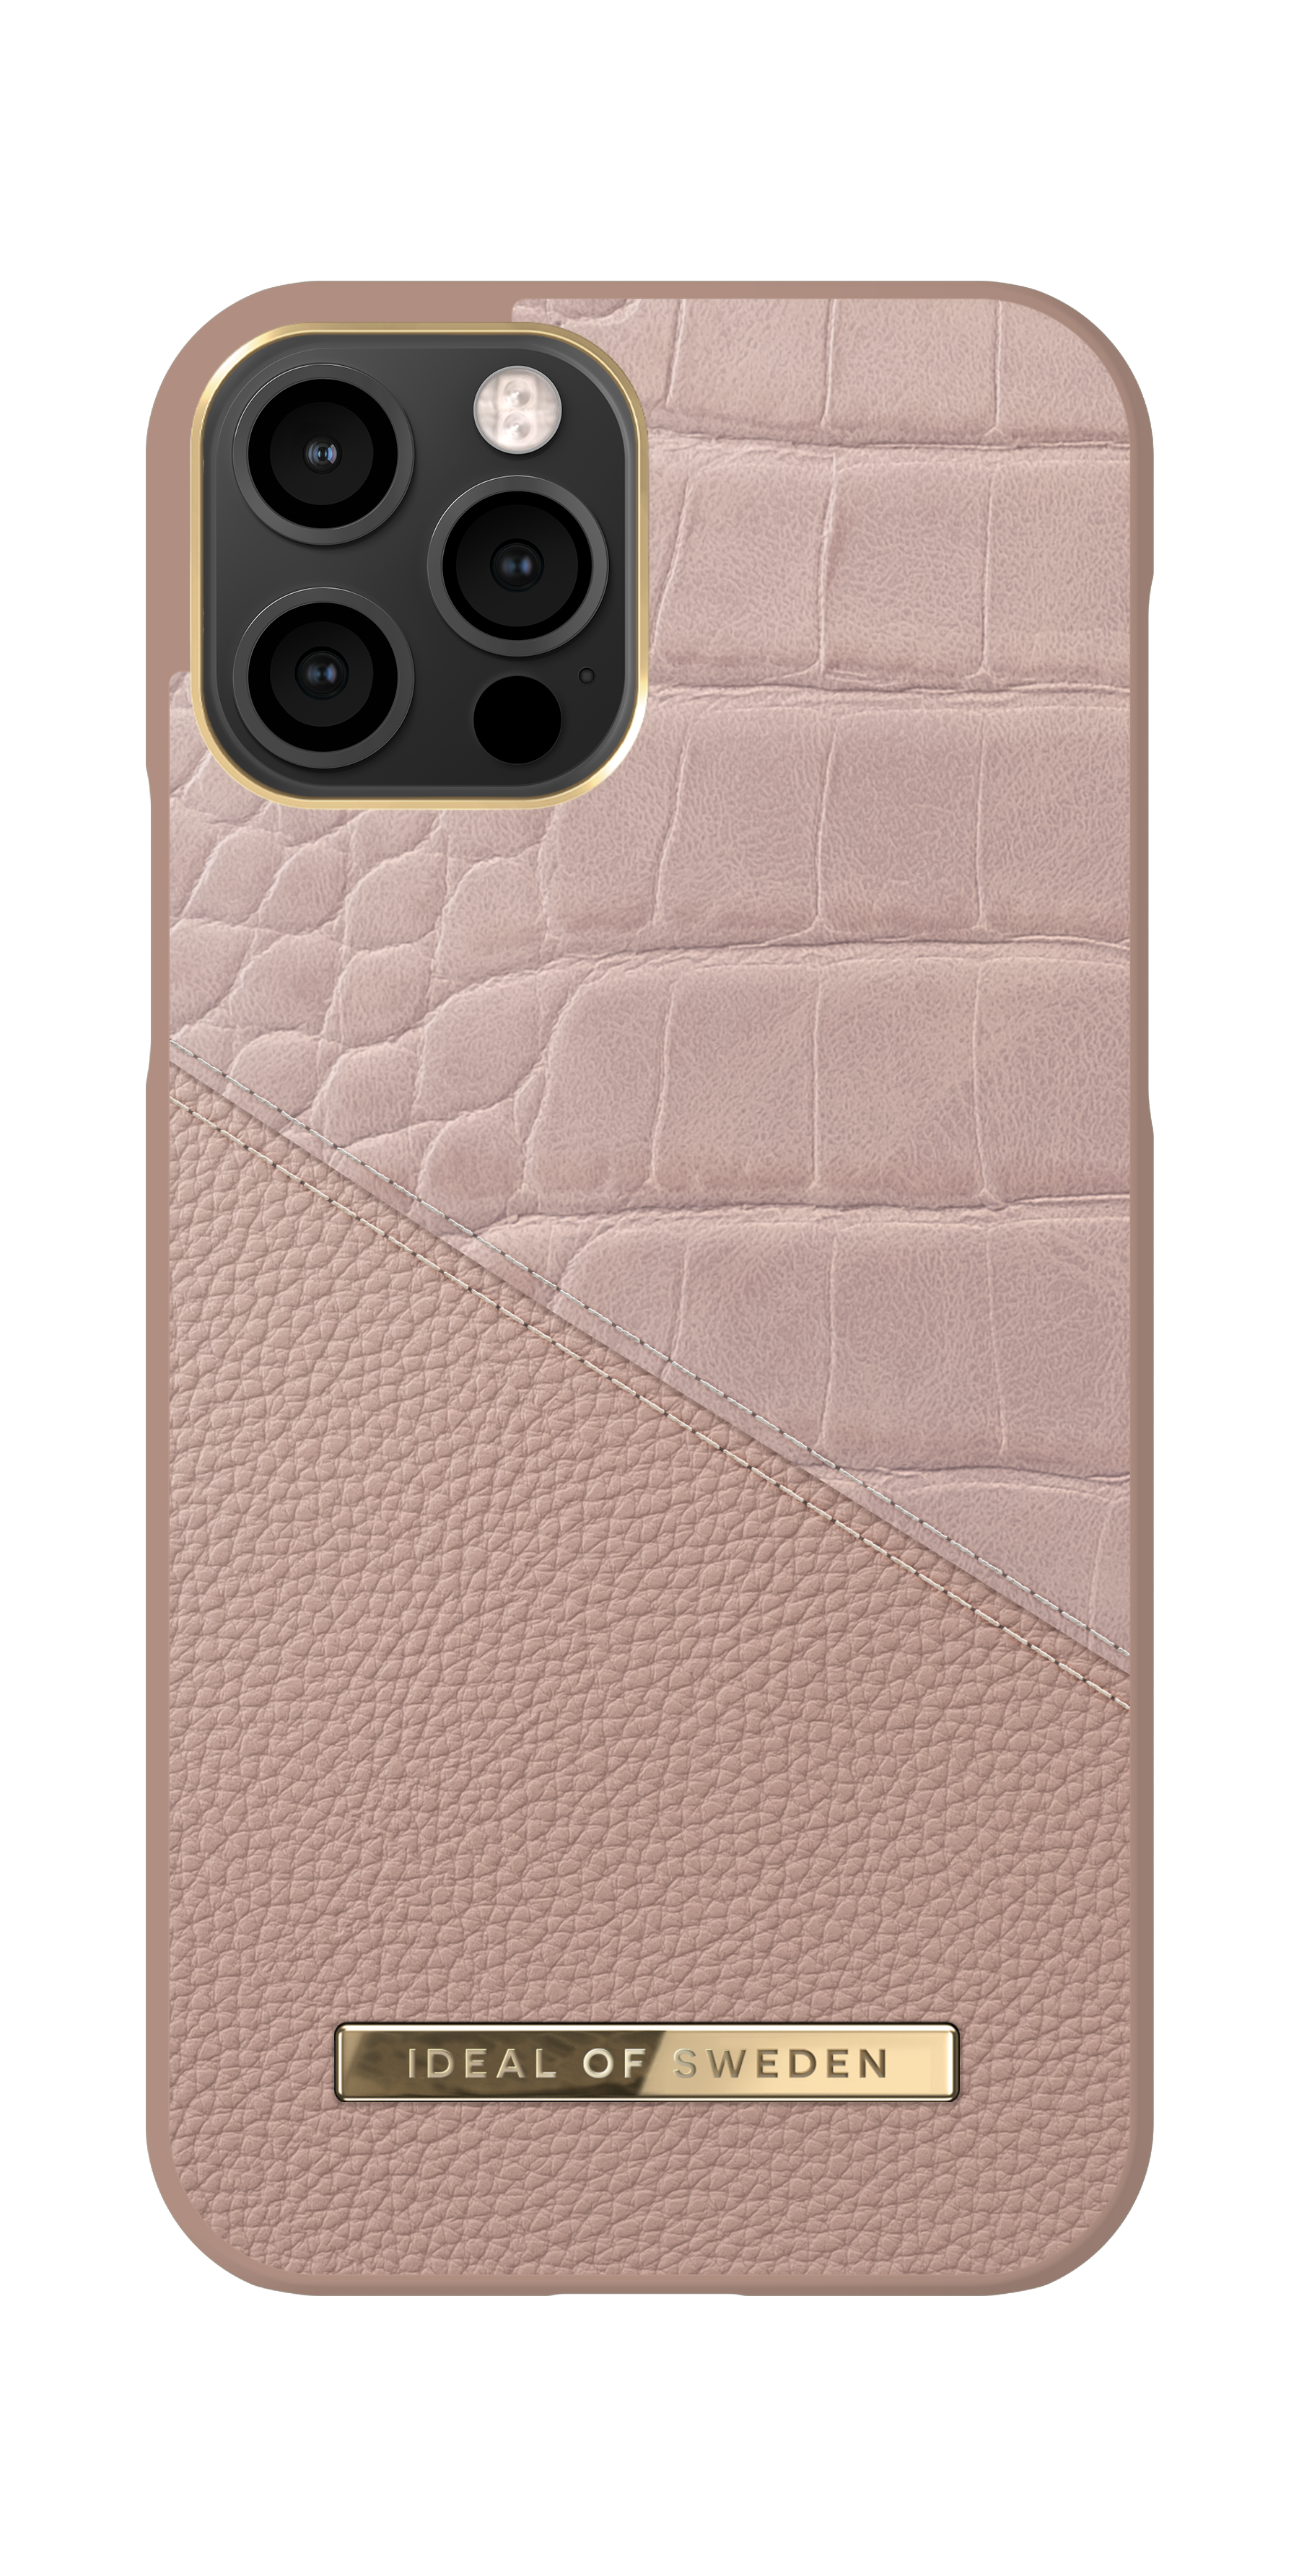 IDEAL OF Smoke IDACSS20-I2061-202, iPhone Pro, Backcover, Croco Apple, 12 12, SWEDEN iPhone Rose